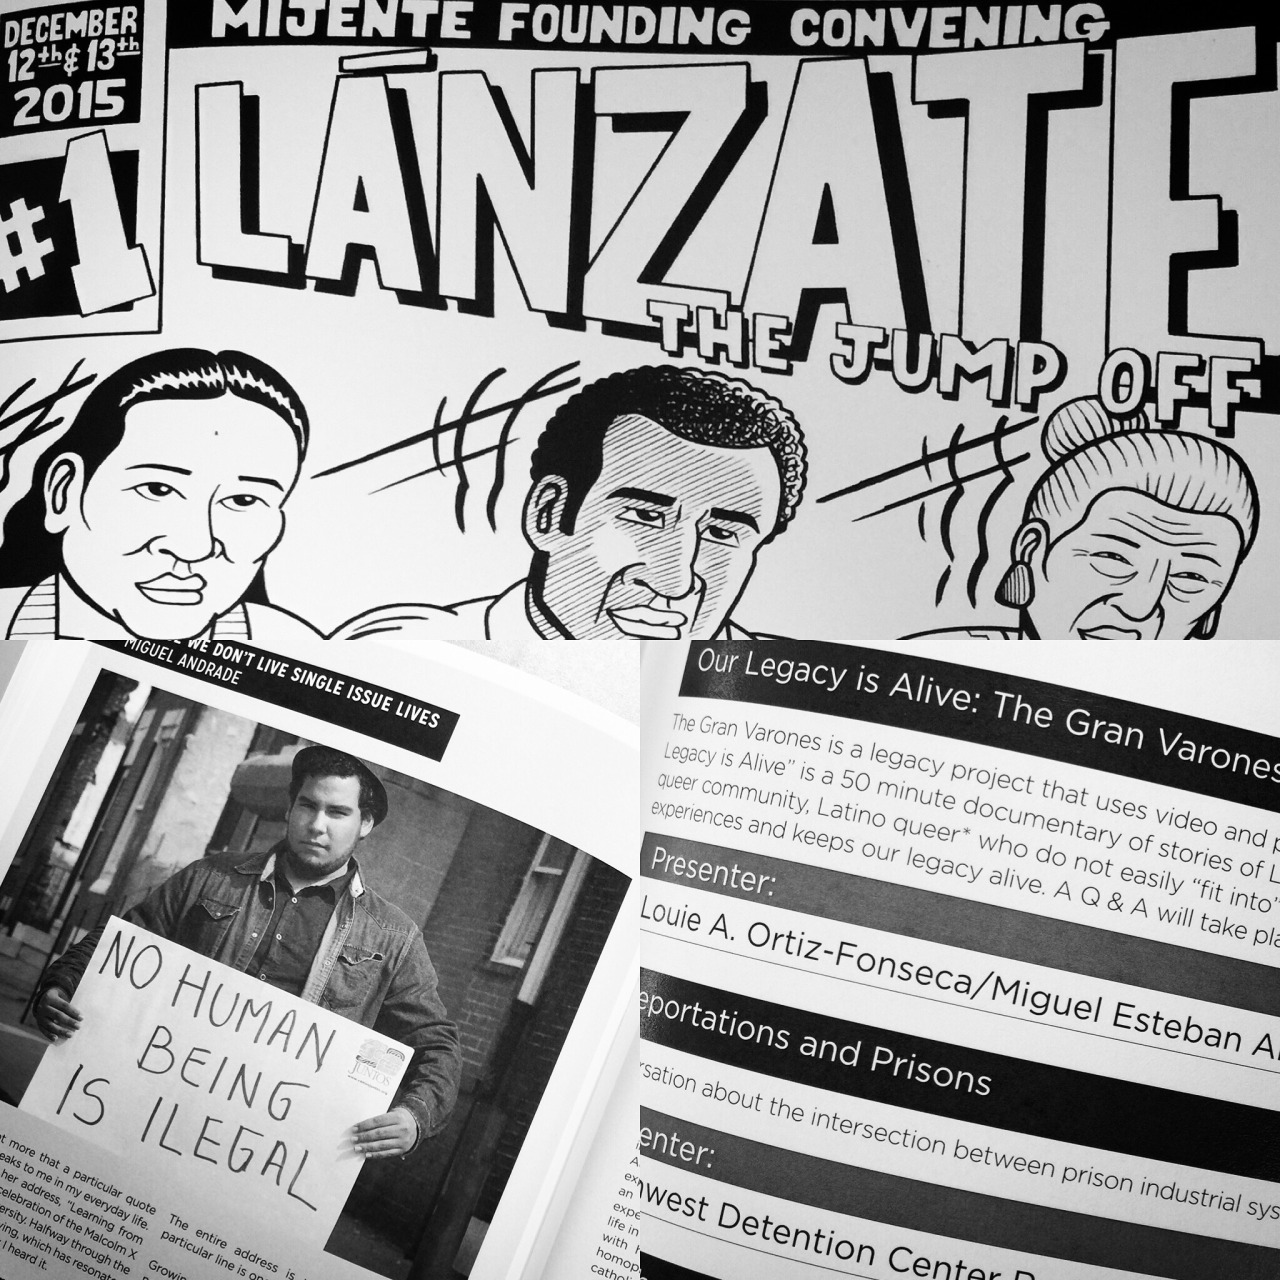 we are here at the Mijente #Lánzate Convening! we will be live tweeting. follow us on Twitter.
we will also be screening our documentary tomorrow! we will also be shooting portraits for the project!
for more information, visit mijente.net/lanzate